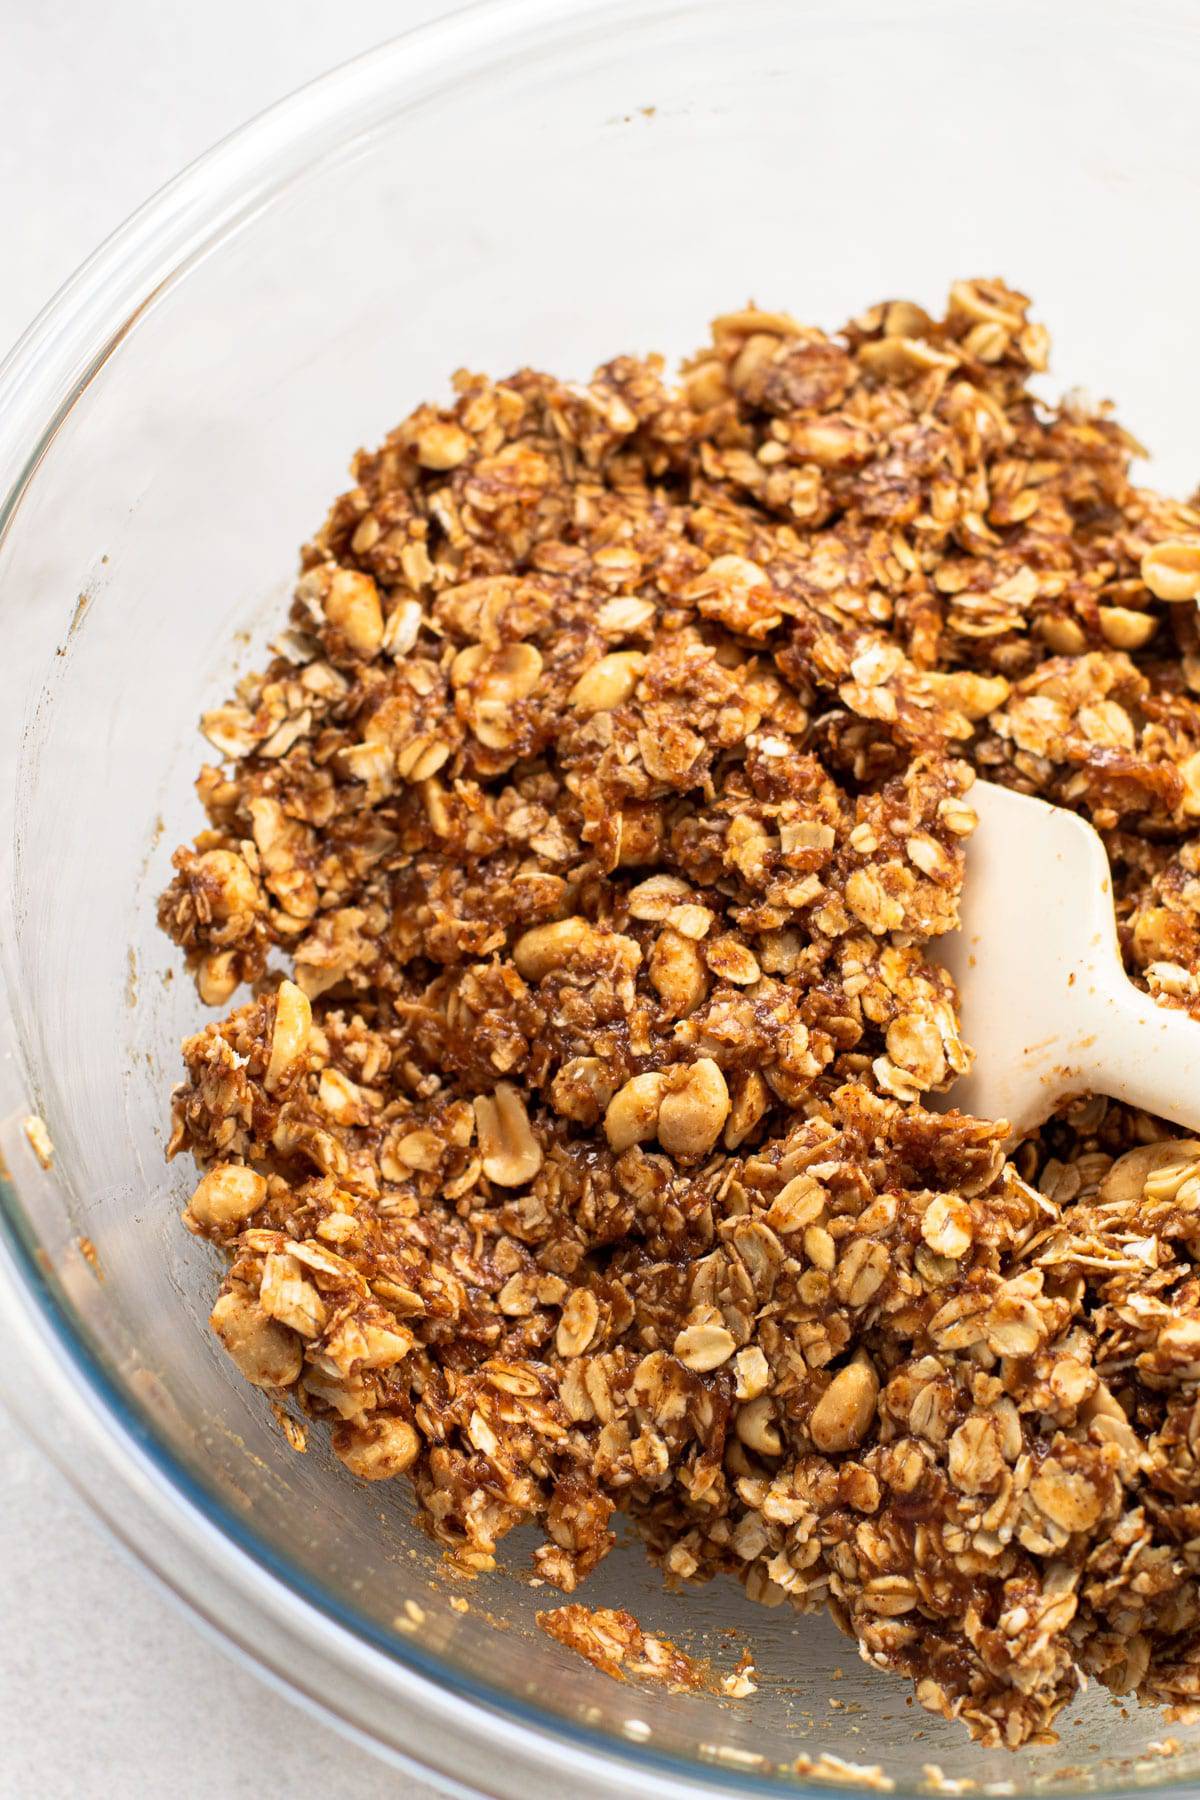 Ingredients for pb + j granola mixed together in a bowl.